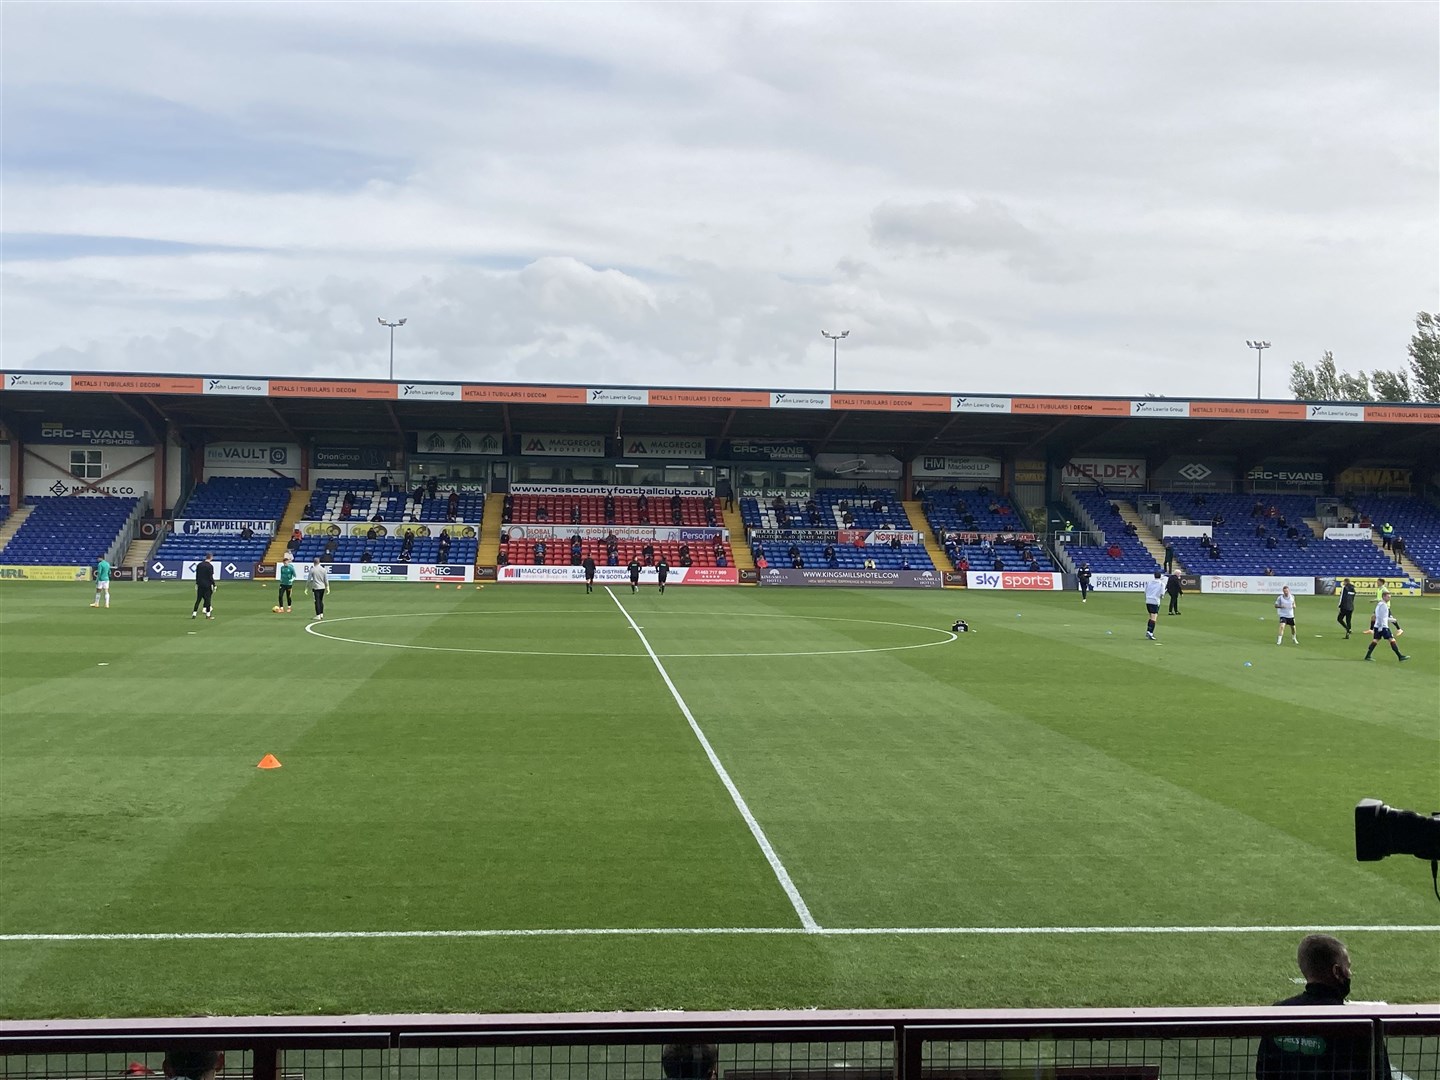 300 Ross County fans were allowed into the stadium to watch the club's Premiership match against Celtic.